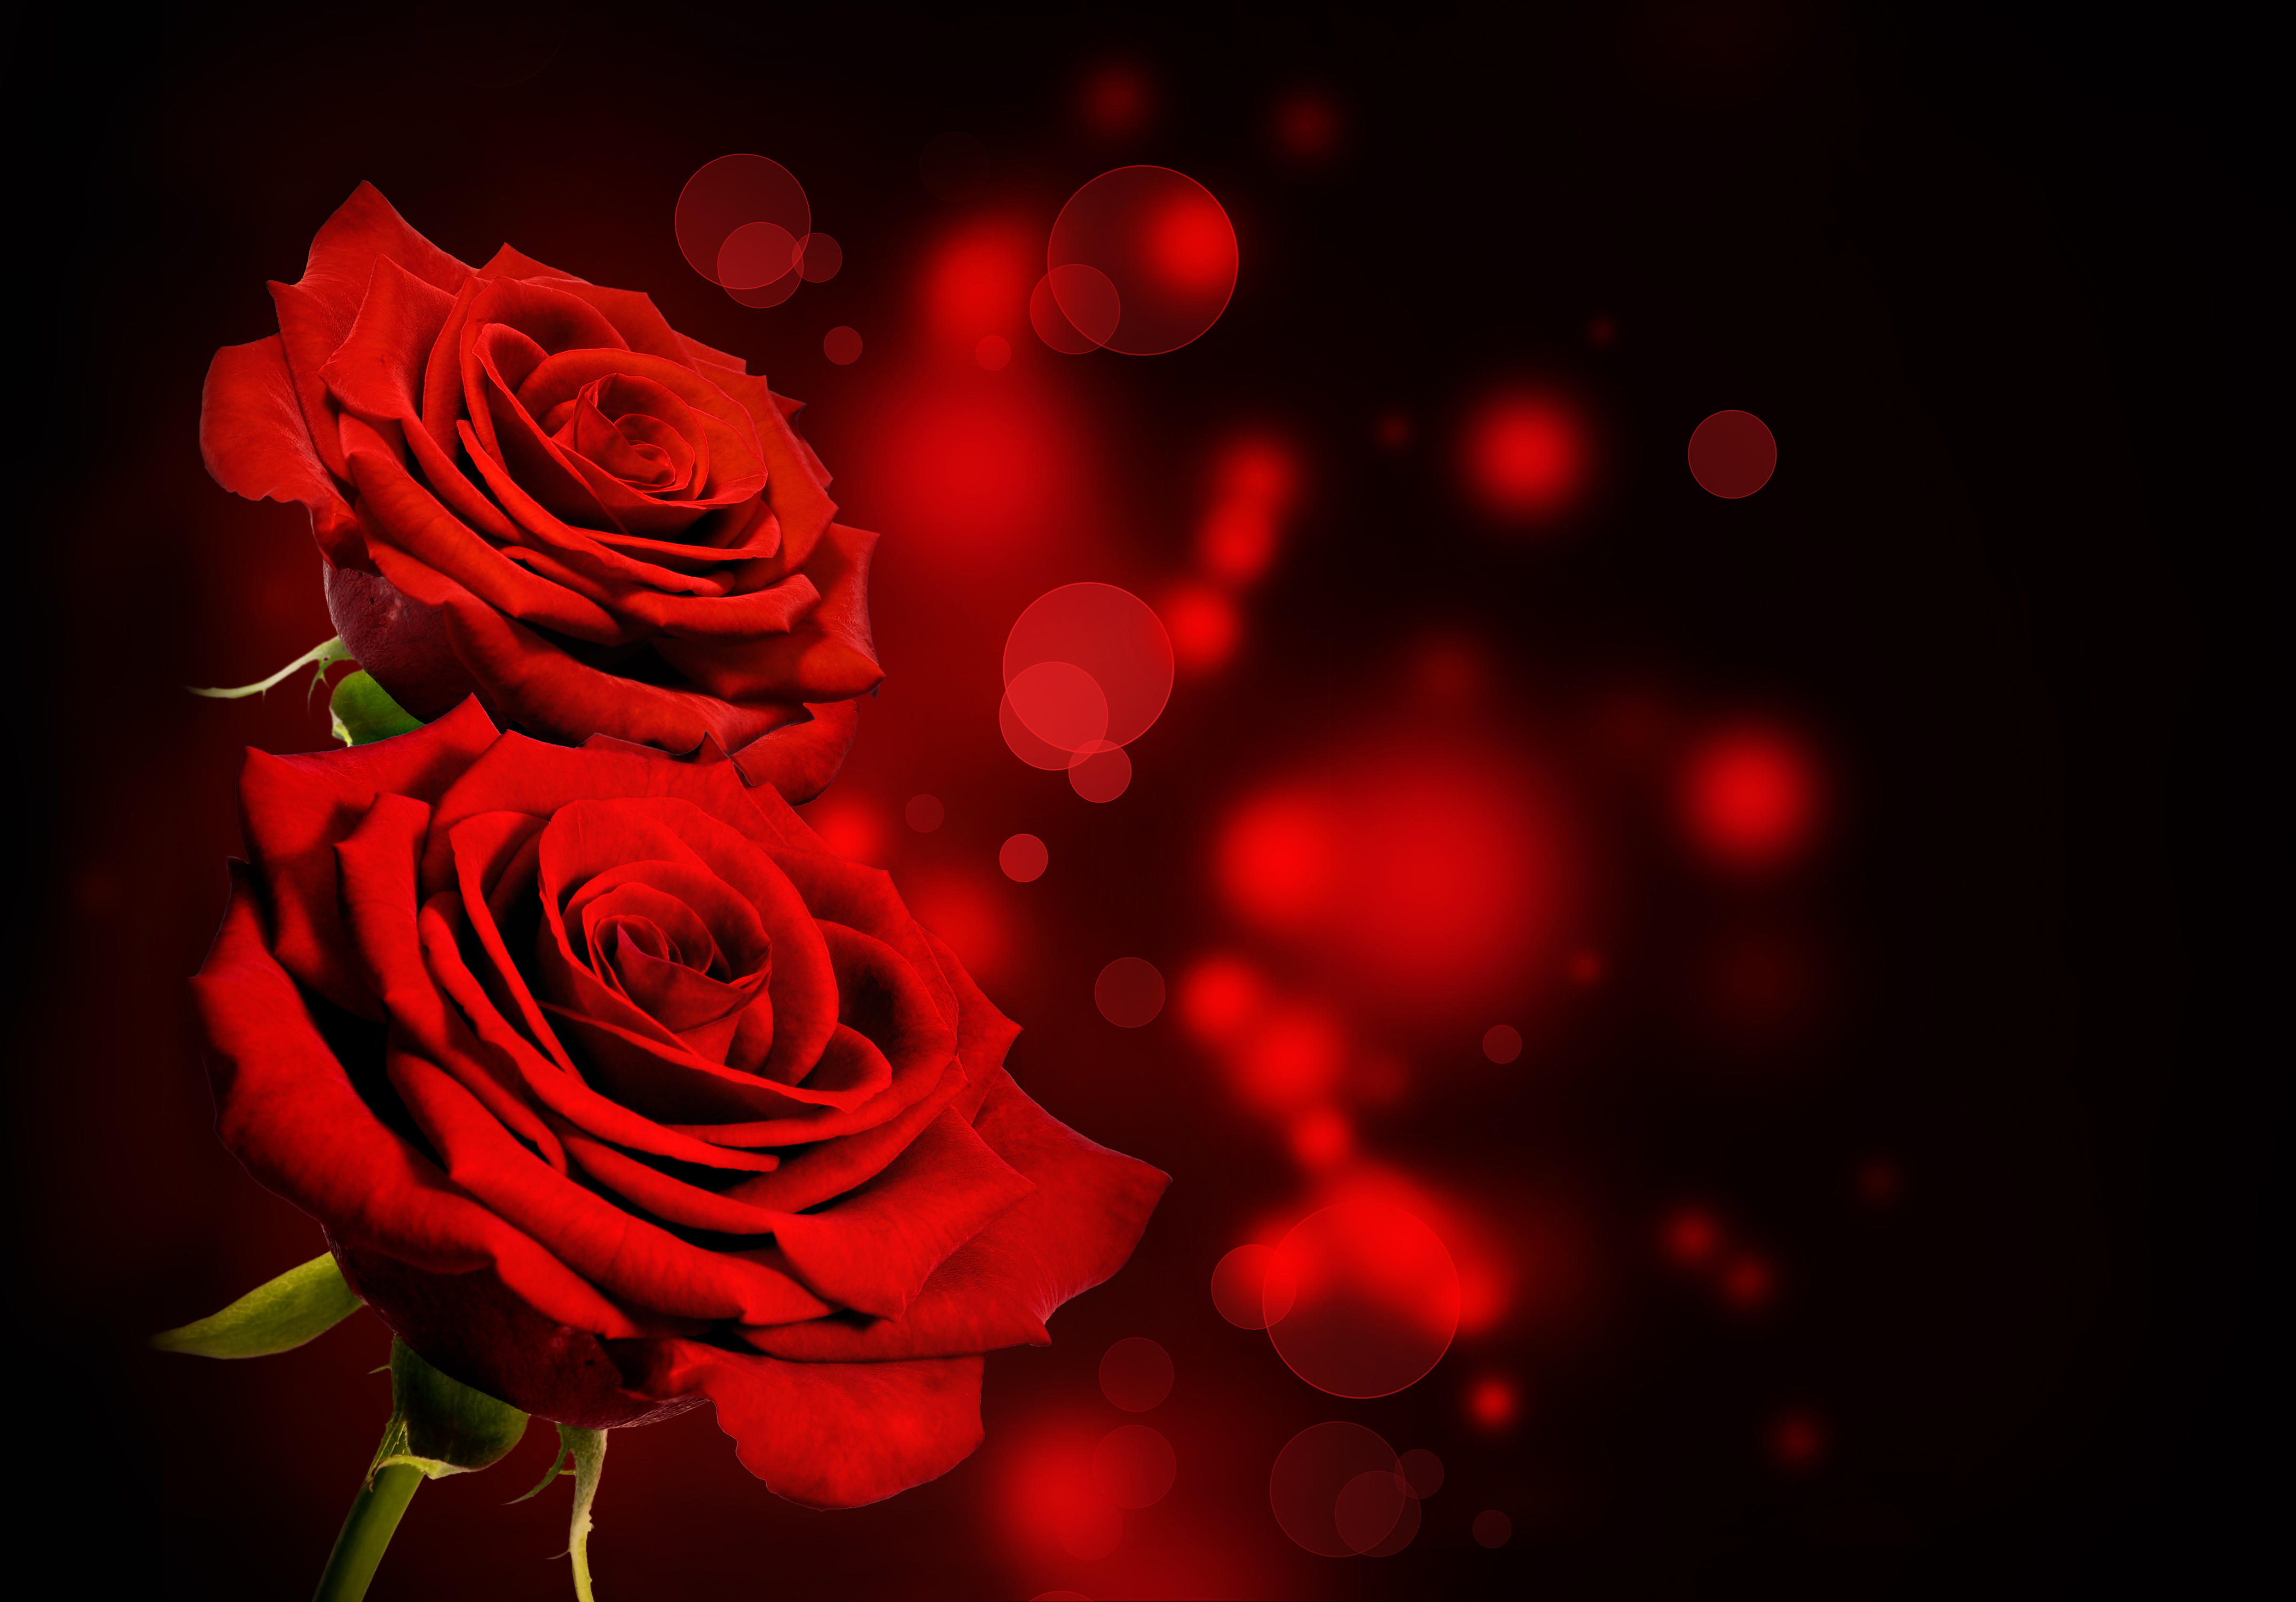 Wallpapers rose red bouquet red roses on the desktop